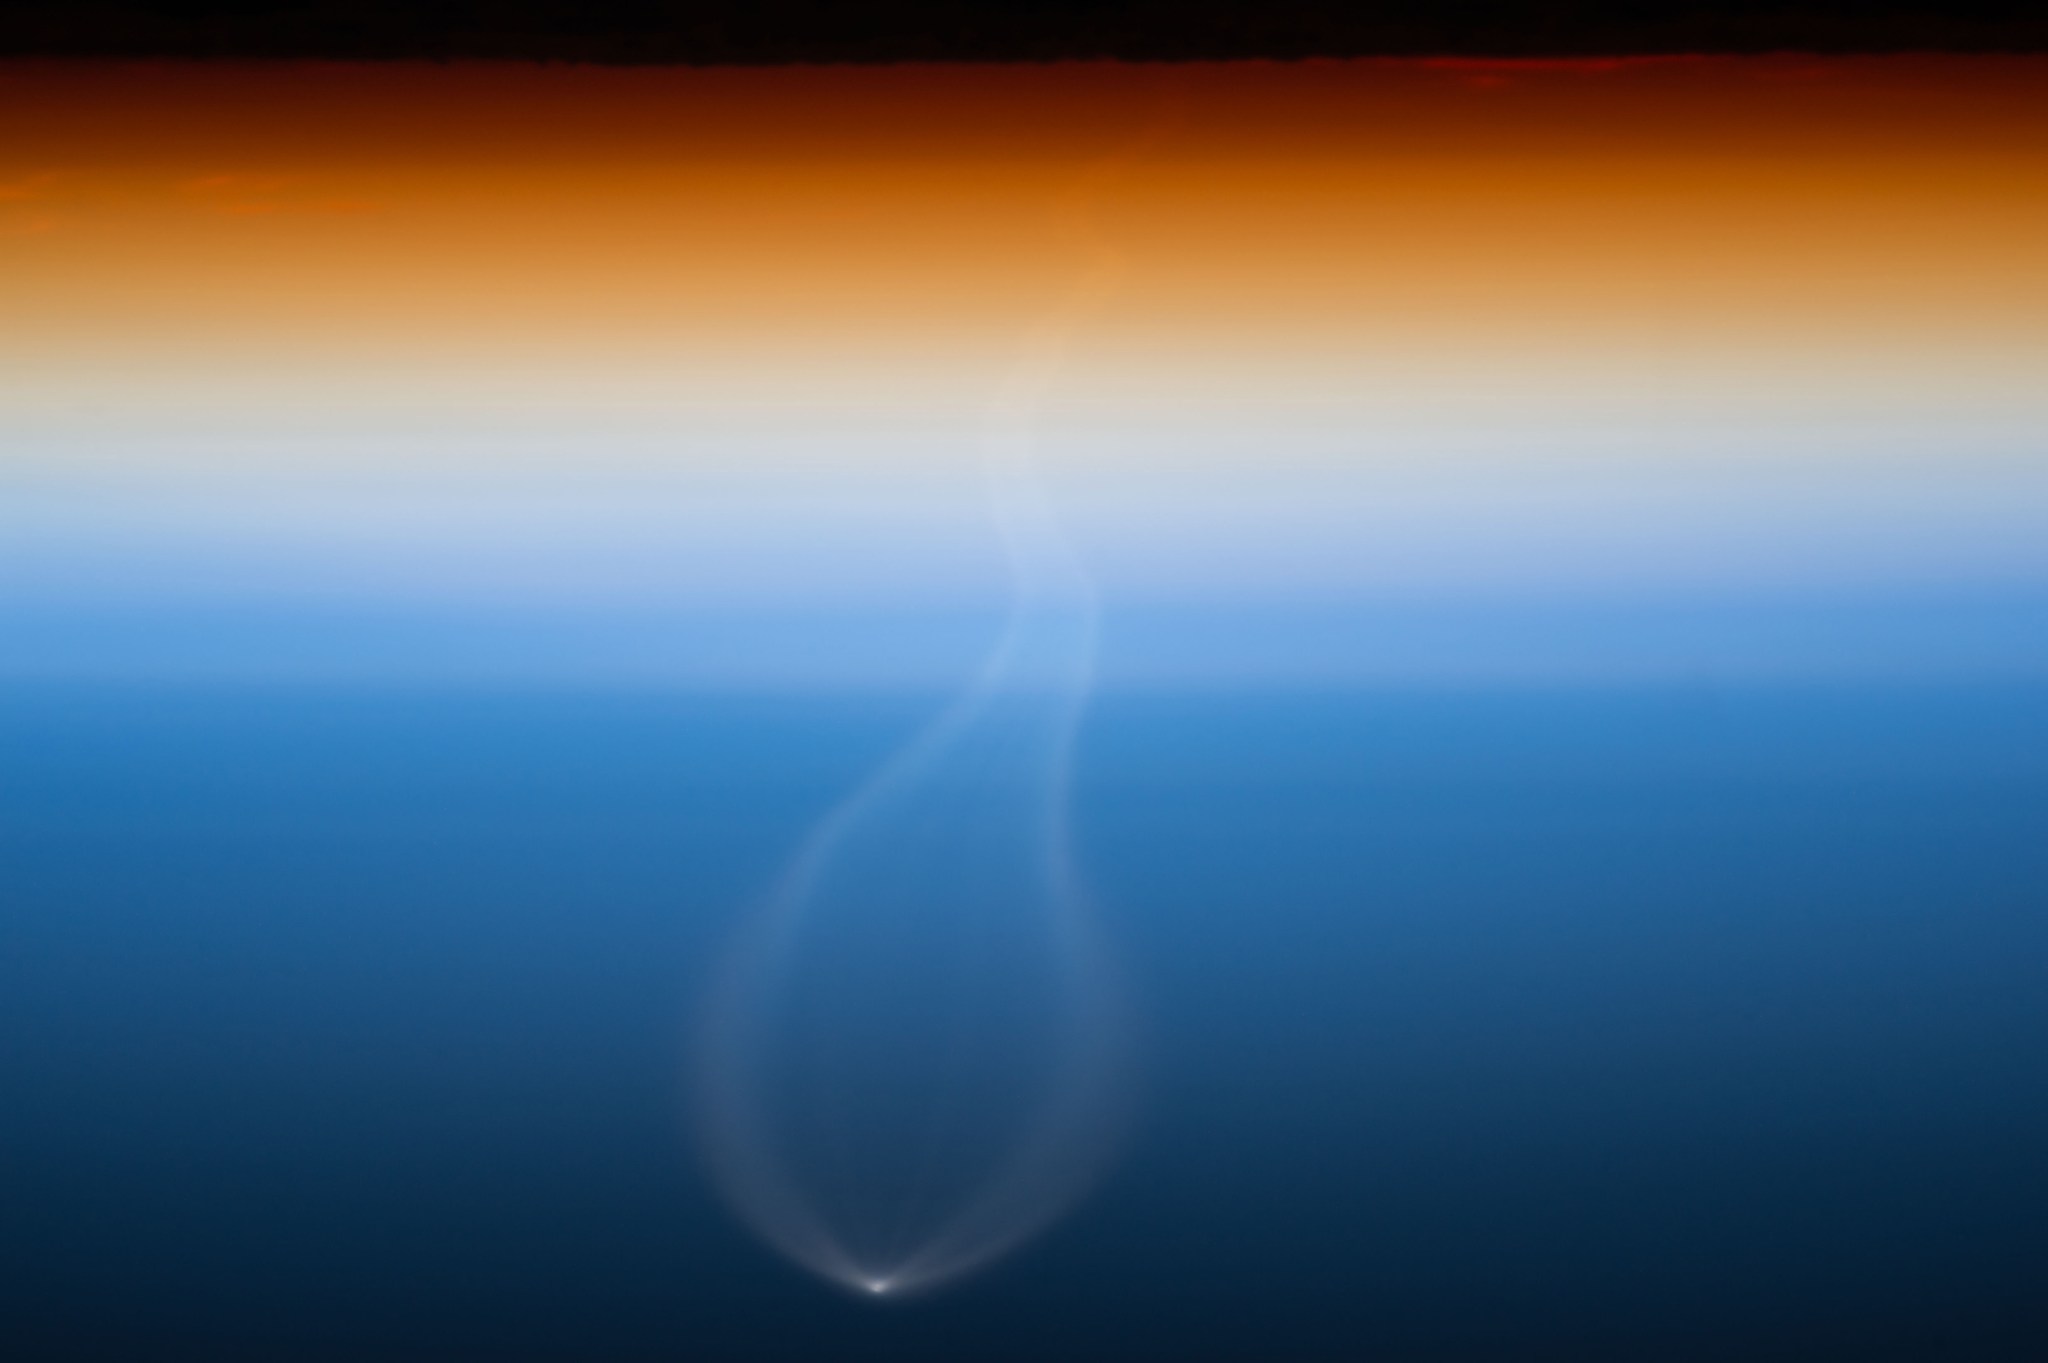 Earth's atmosphere at sunset with bright spot of rocket launch visible below